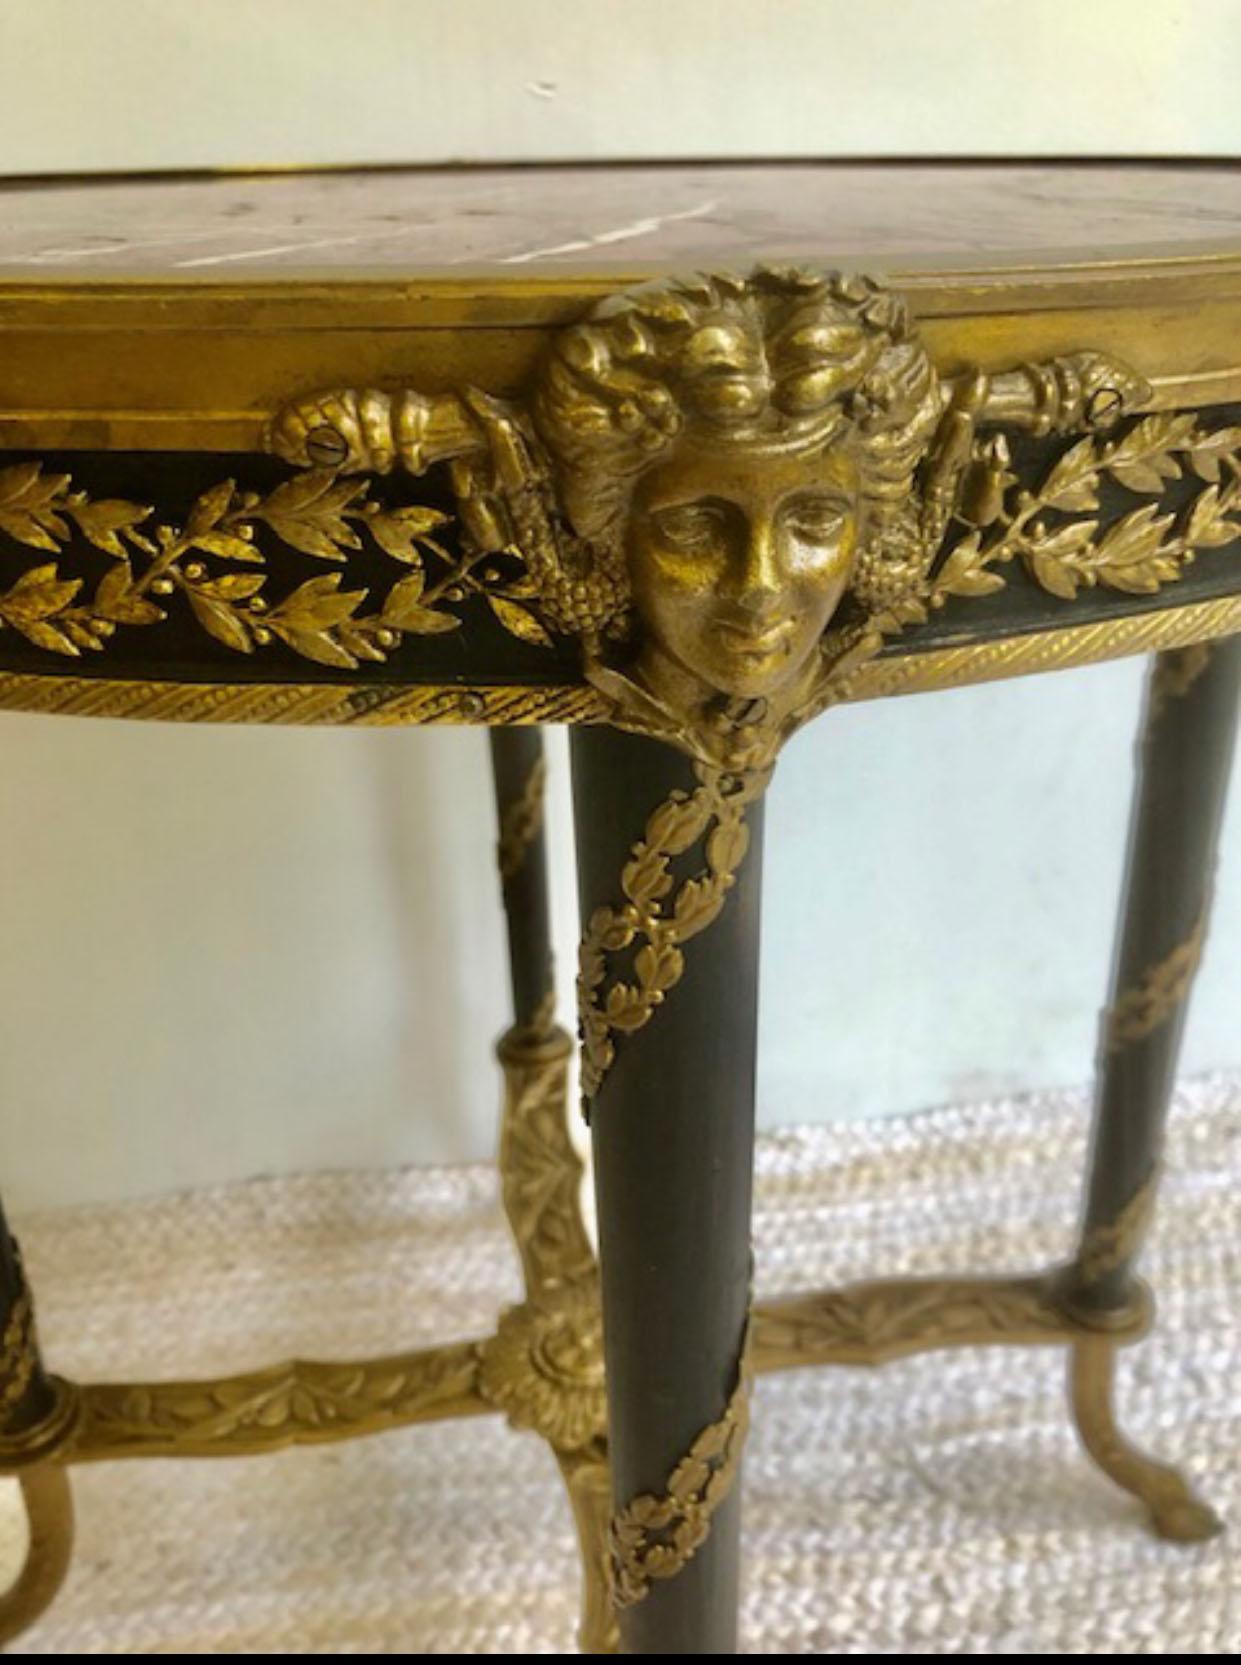 Rare 19th C signed French bronze ormolu mounted hoof or paw foot round bouillotte occasional end side table.
Wonderful table with bronze stretcher, legs topped off with classical bronze face, inset with marble. Wood legs wrapped with bronze leaf